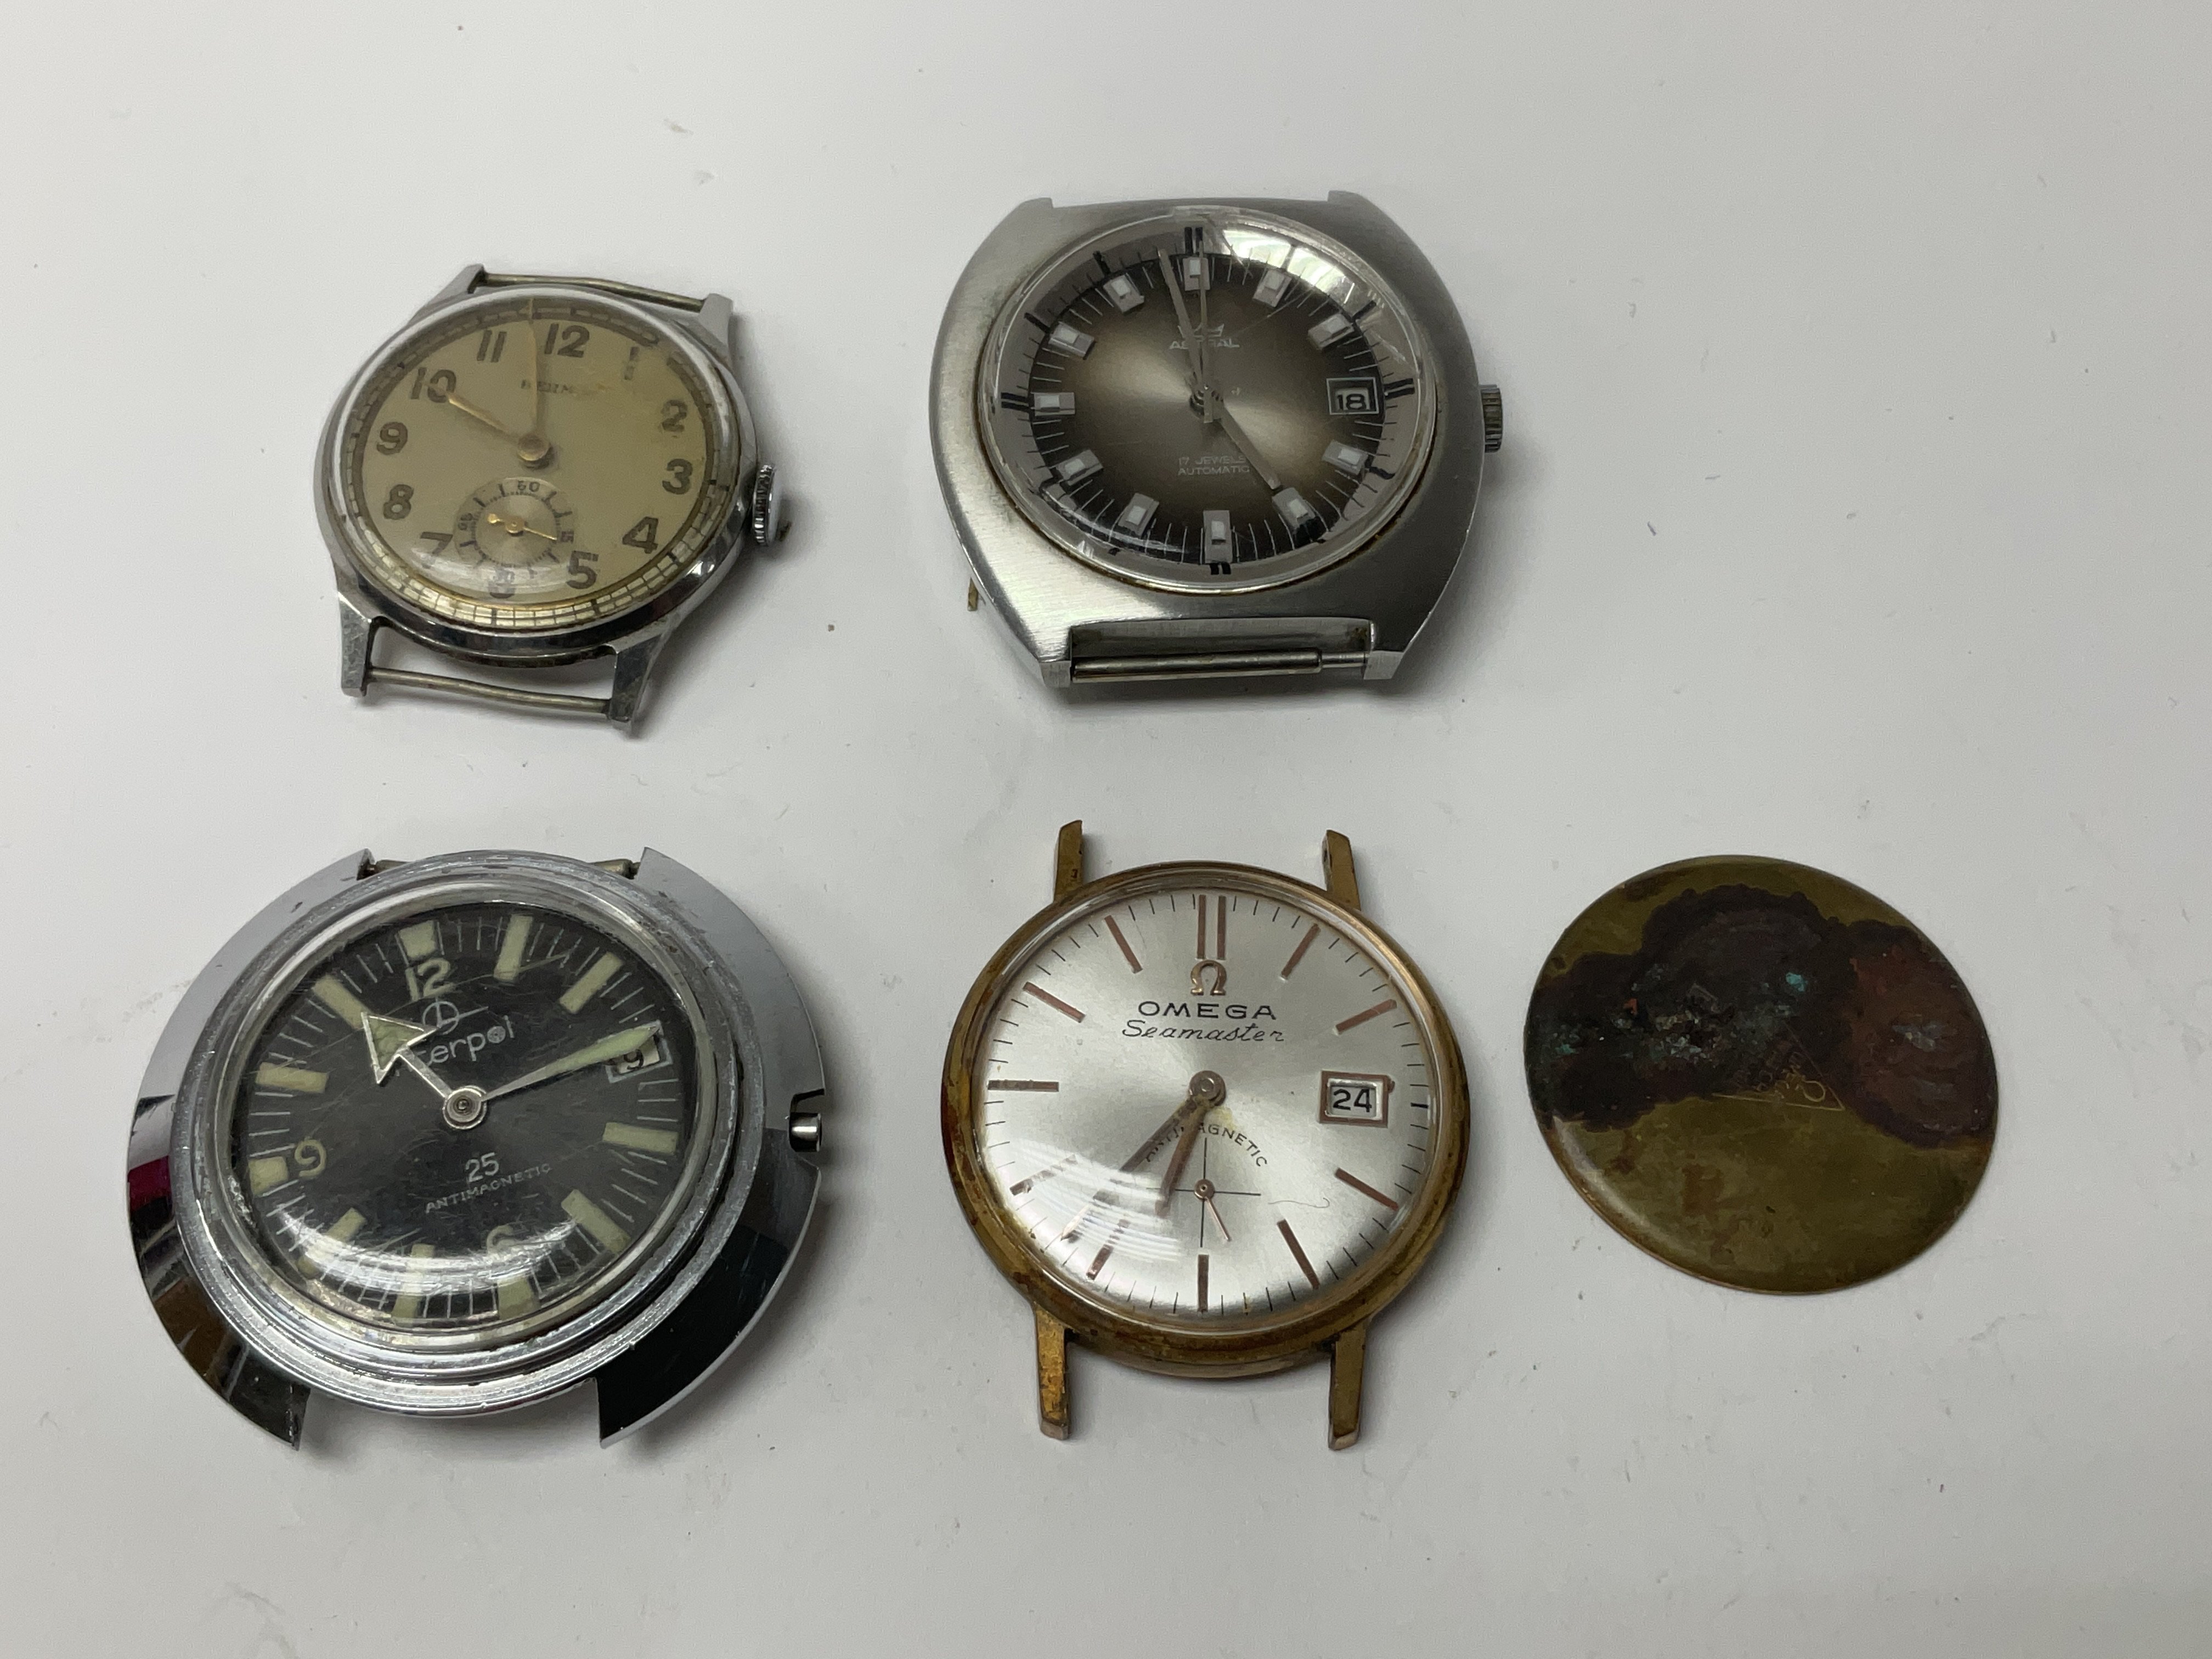 4 vintage gents watches including a Omega Seamaste - Image 2 of 4